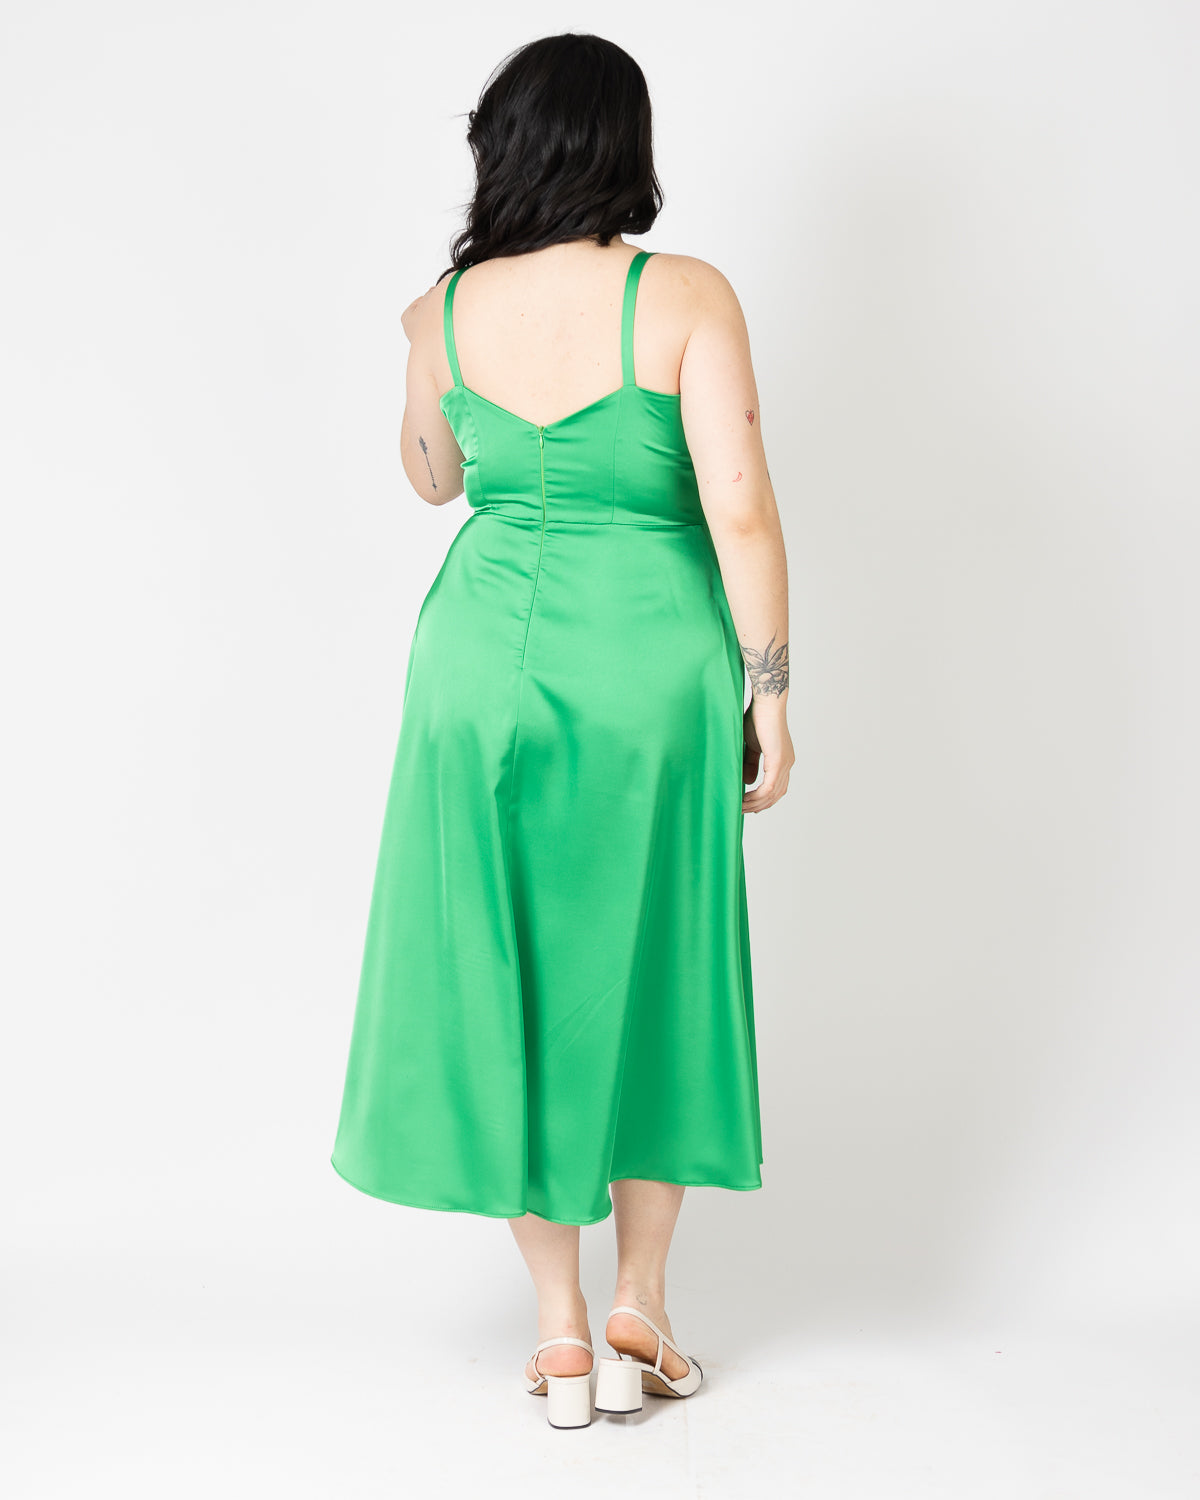 Atomic | Ankle-Length Cocktail Dress